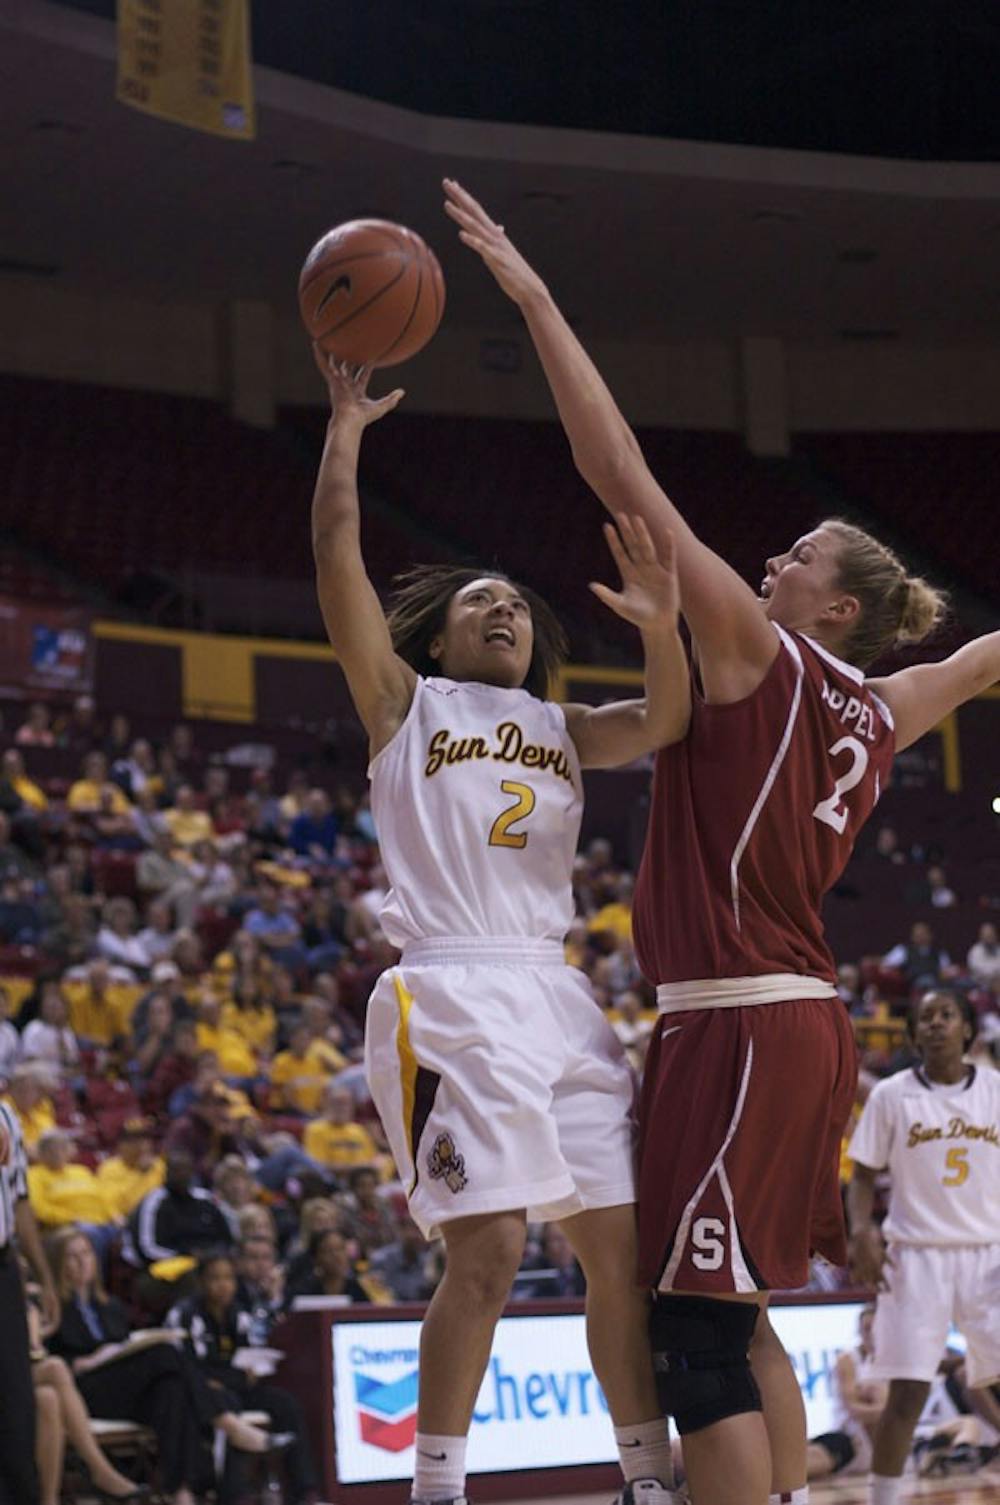 up and over: ASU freshman guard Sabrina McKinney attempts a shot over Stanford senior center Jayne Appel in the Sun Devils’ 62-43 loss to the Cardinal last month at Wells Fargo Arena. (Photo by Scott Stuk)